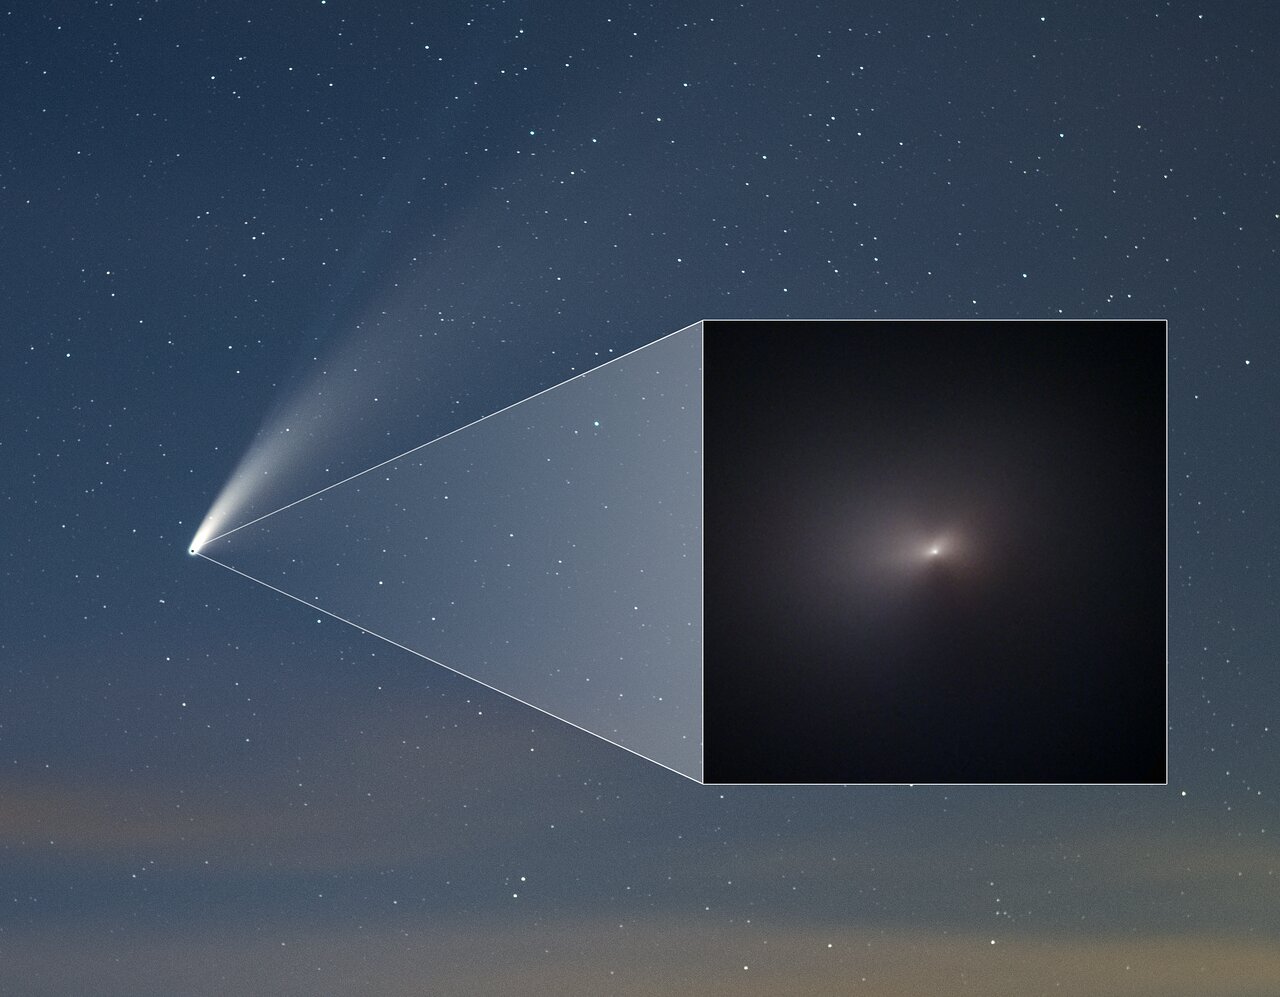 NEOWISE comet as seen from the ground on July 18, and the new close-up image, inset, taken by Hubble on August 8. (Image: NASA, ESA, Q. Zhang (California Institute of Technology), A. Pagan (STScI), and Z. Levay)